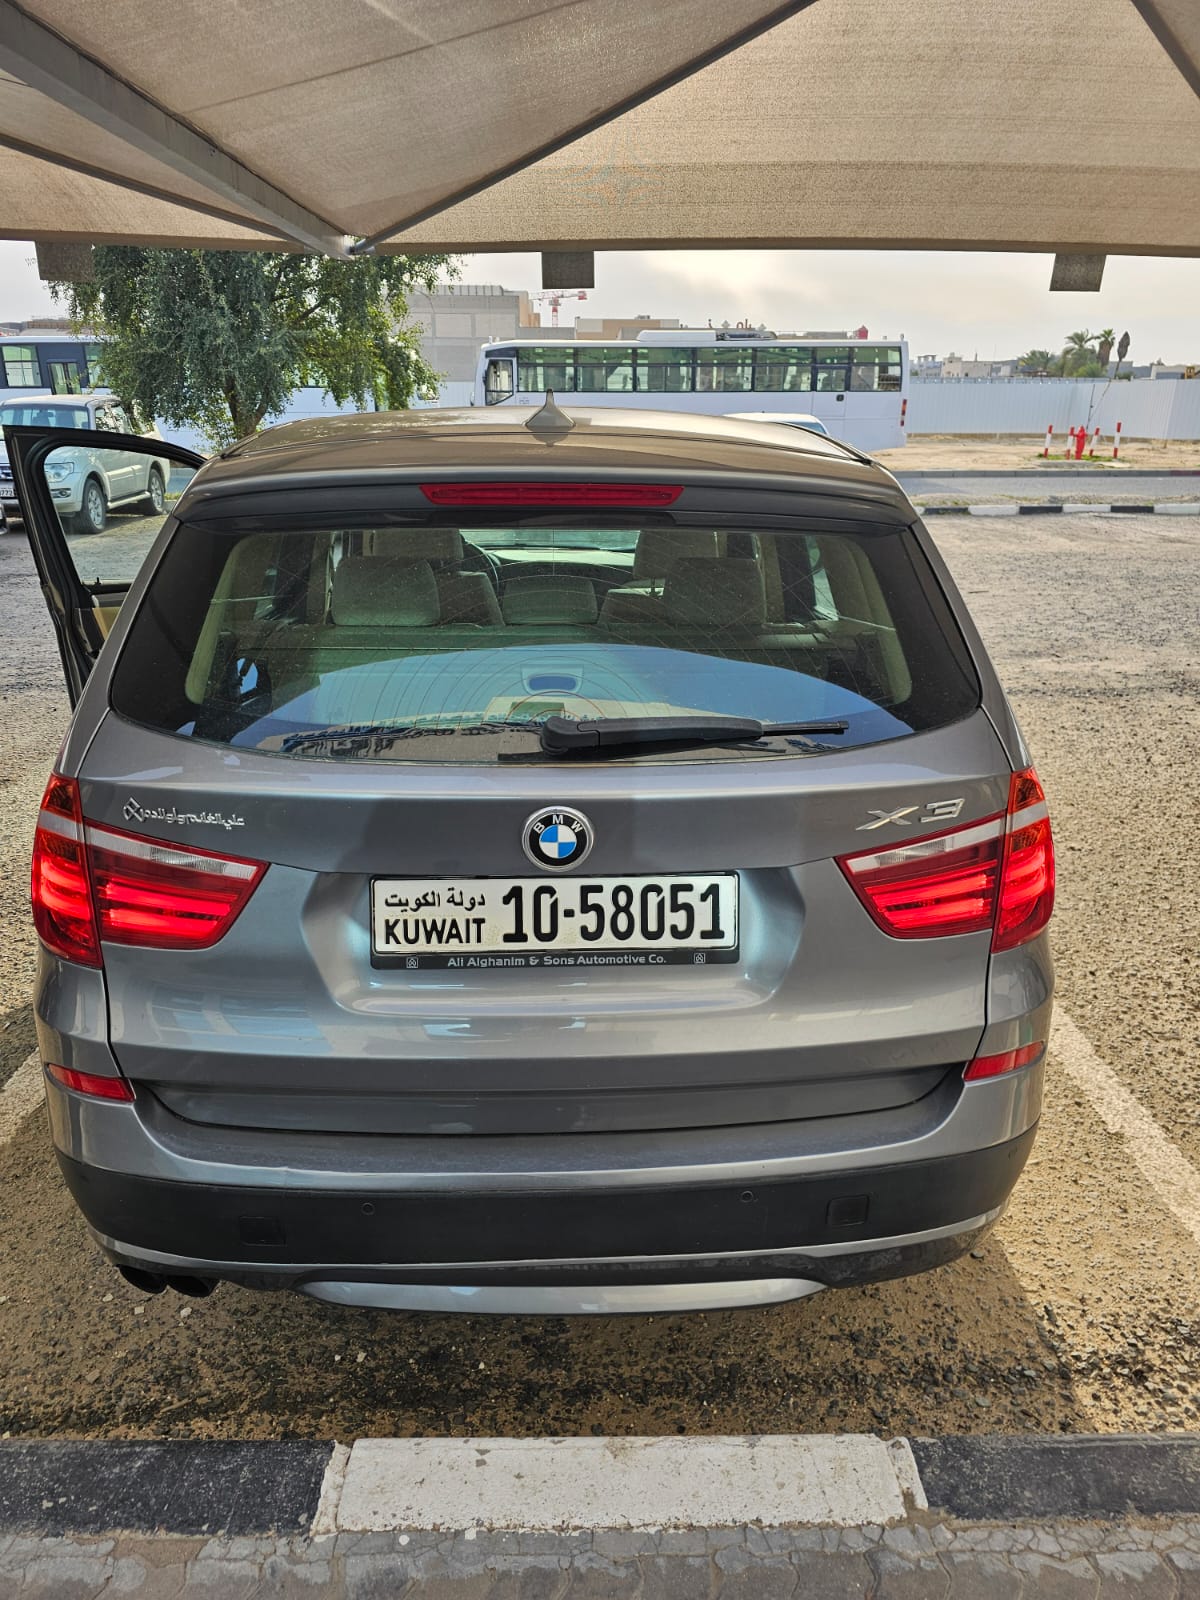 BMW X3 accident free low mileage company maintained vehicle for sale